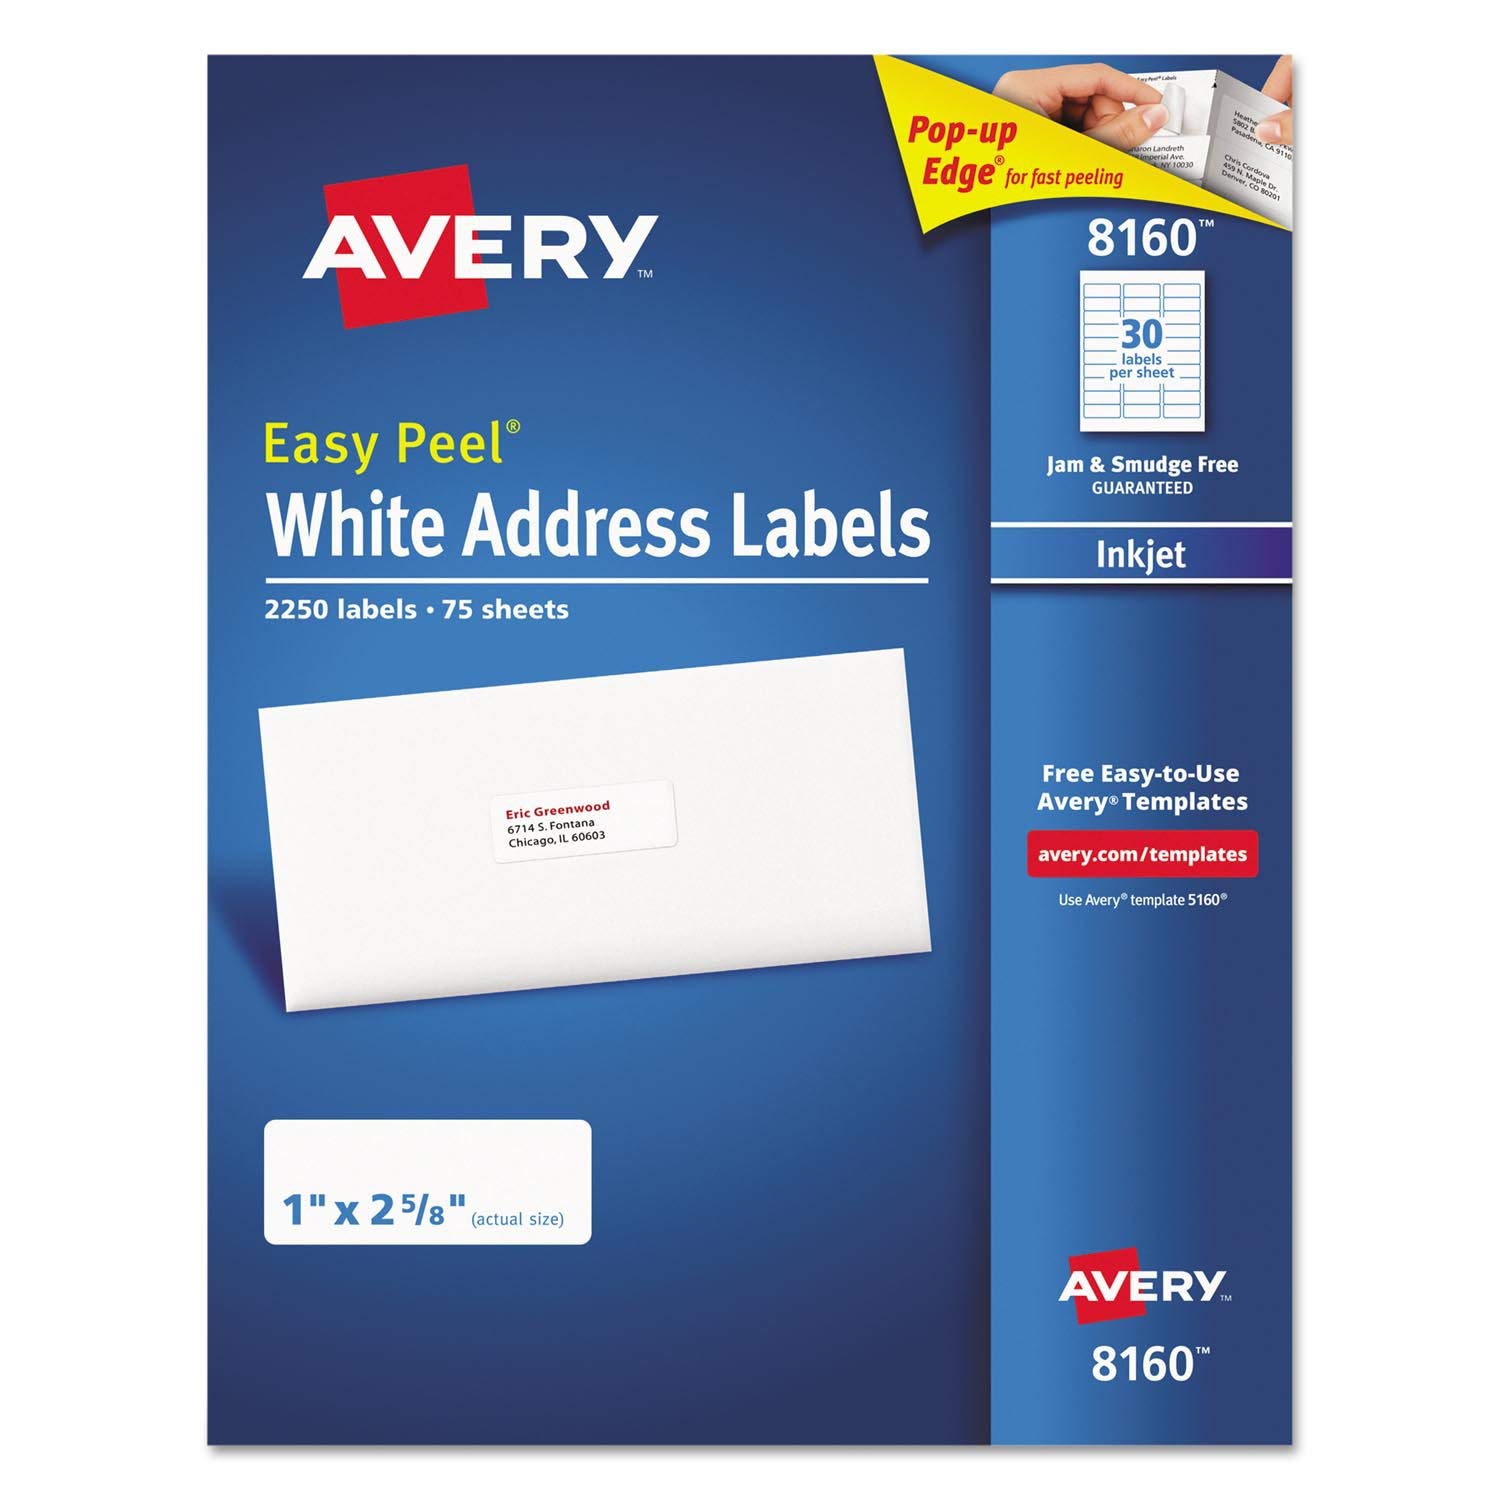 Avery 5160 Template Avery Label Templates Belgralb Find The Most Popular Label Templates